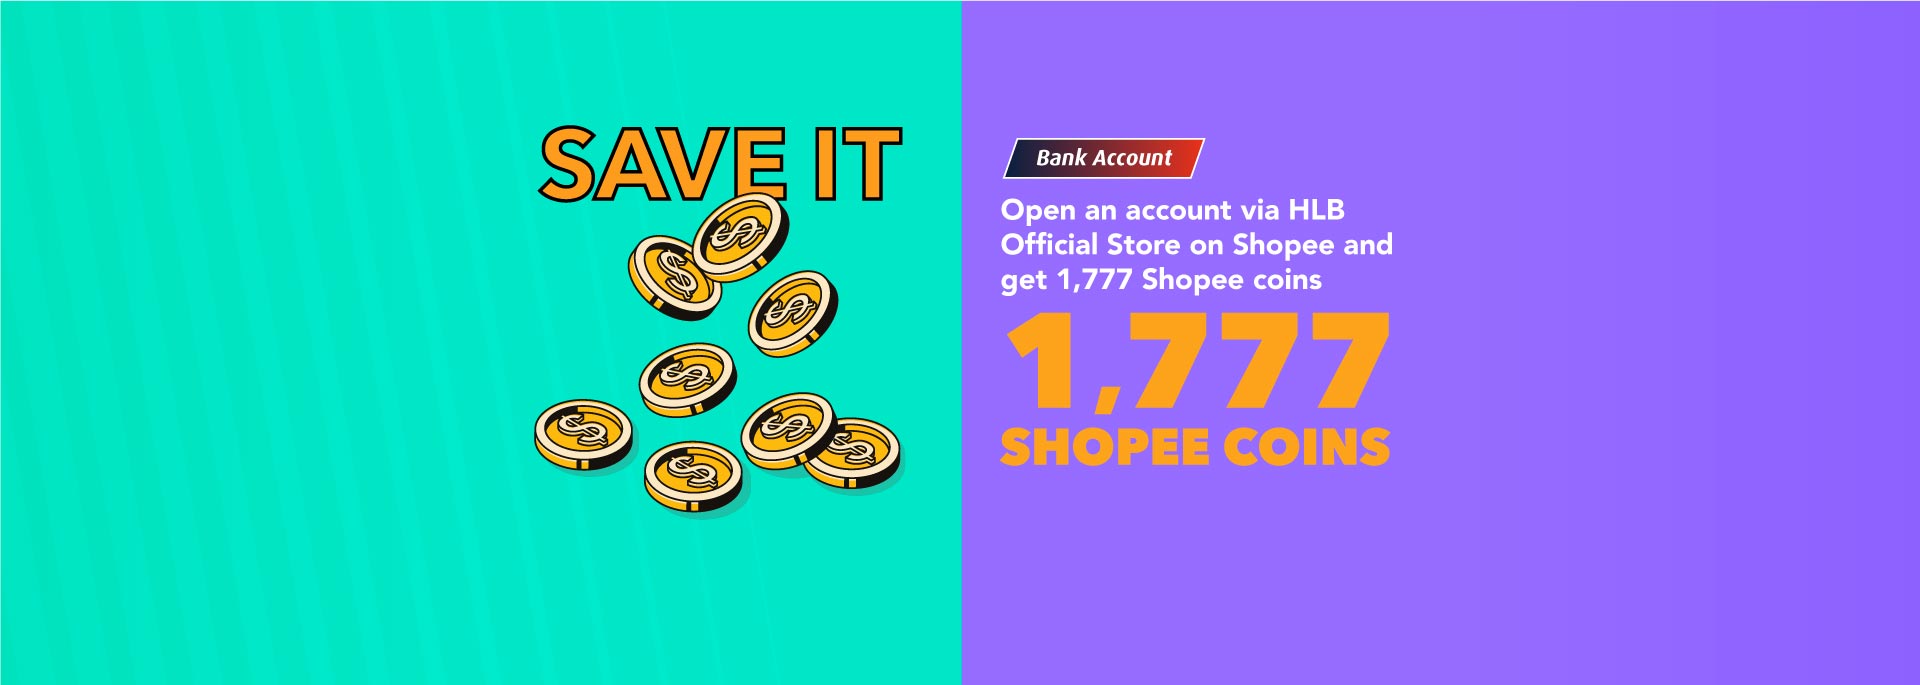 Get 1,777 Shopee coins by opening a HLB account from Shopee